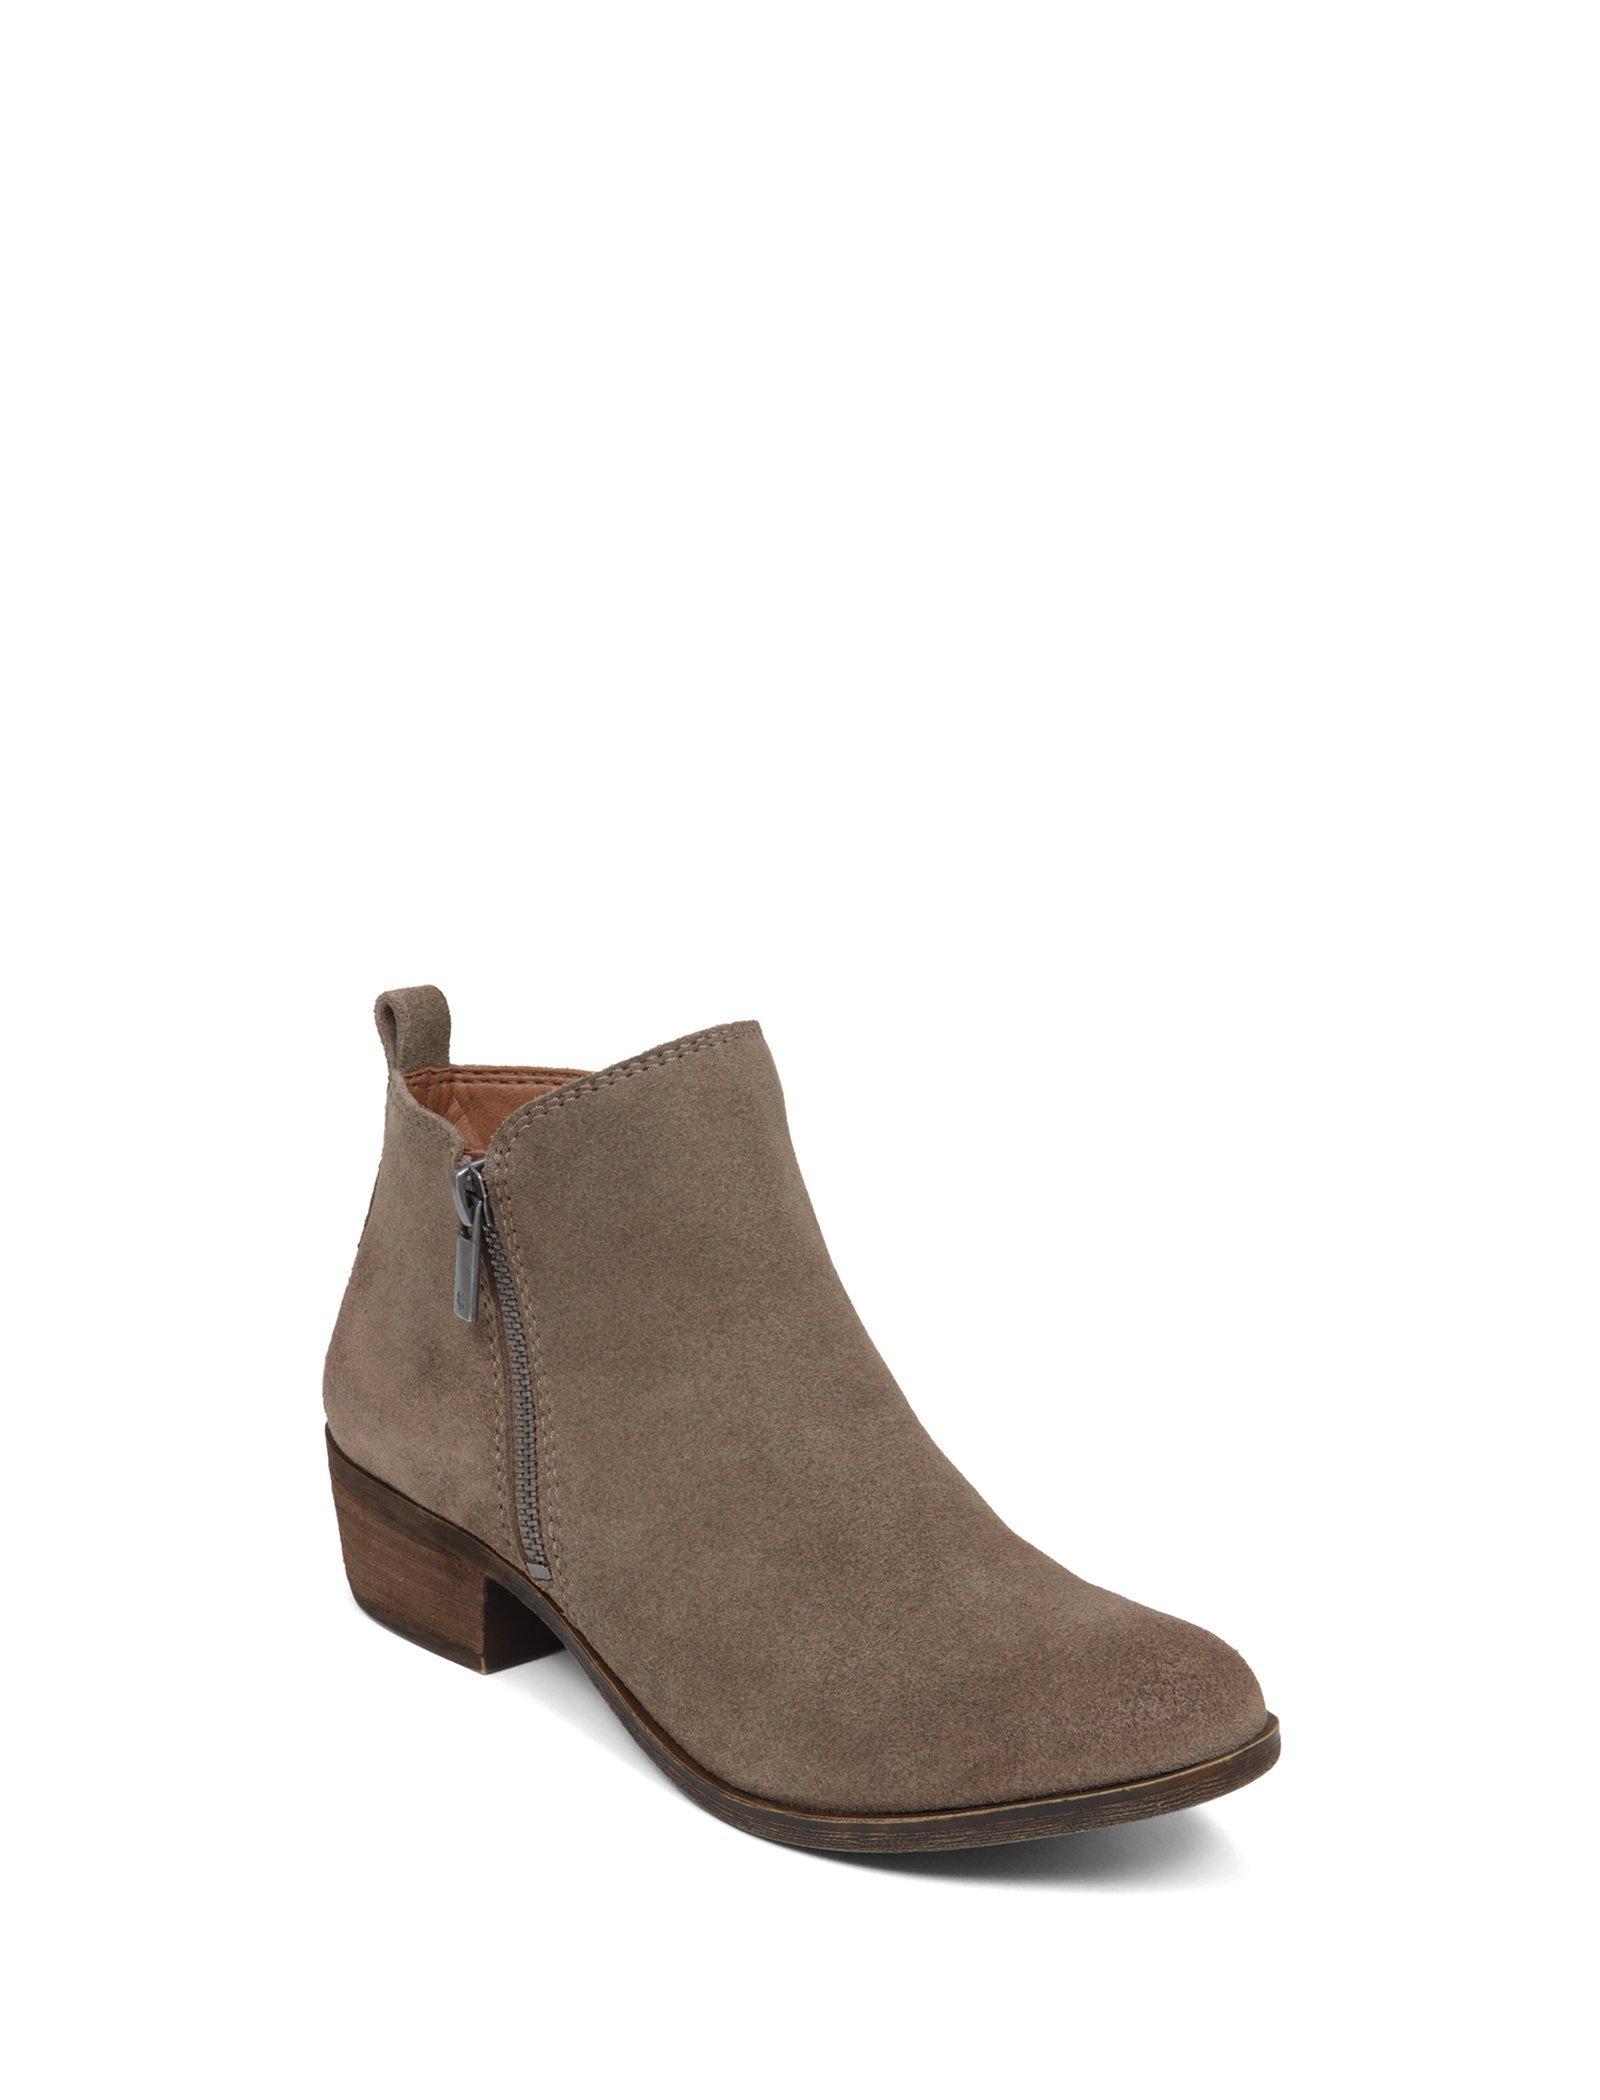 lucky brand grey suede booties